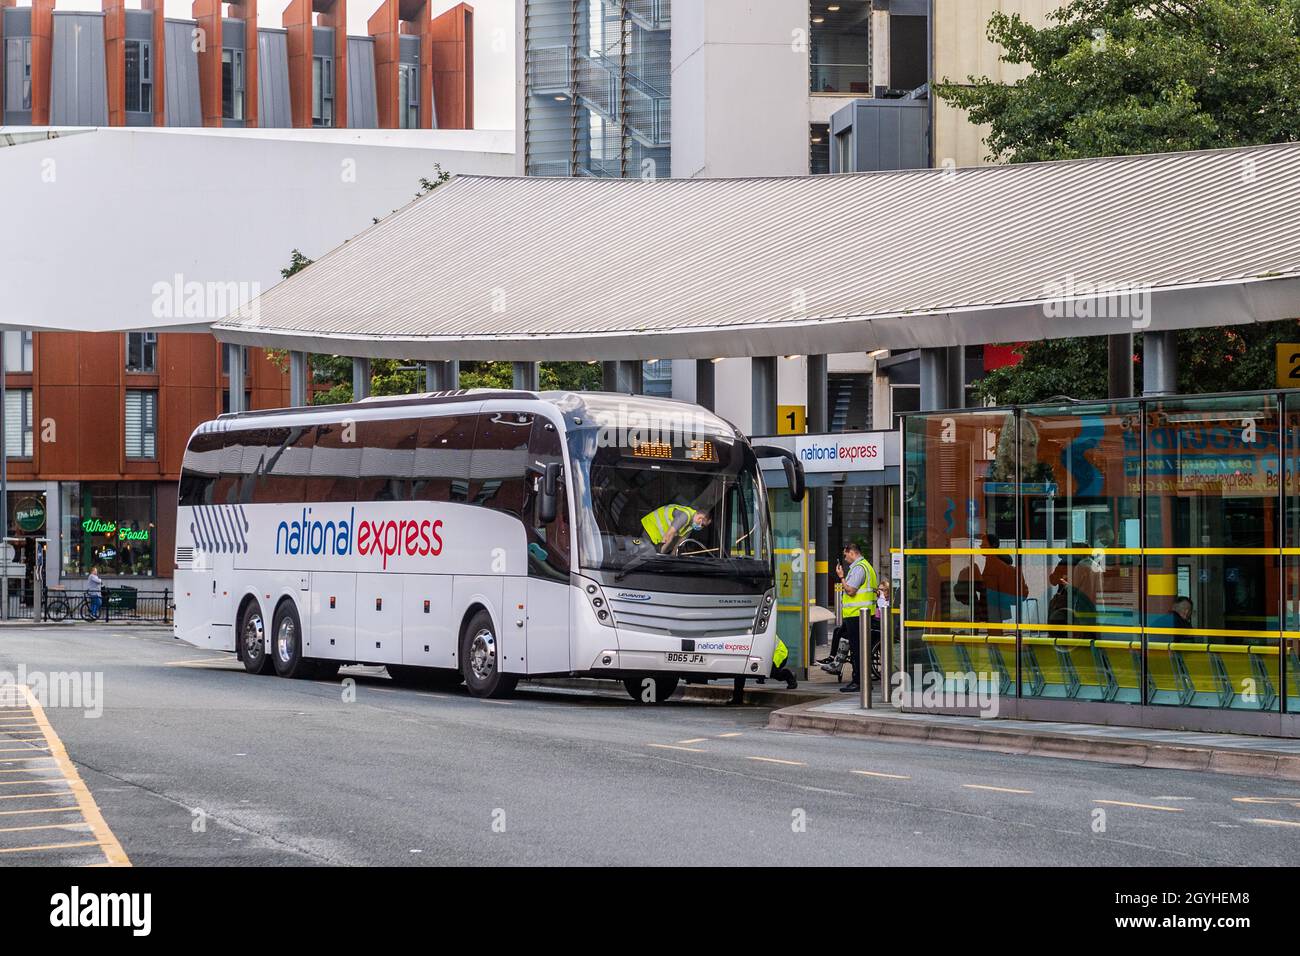 National Express coach stop in Liverpool, Merseyside, UK. Stock Photo